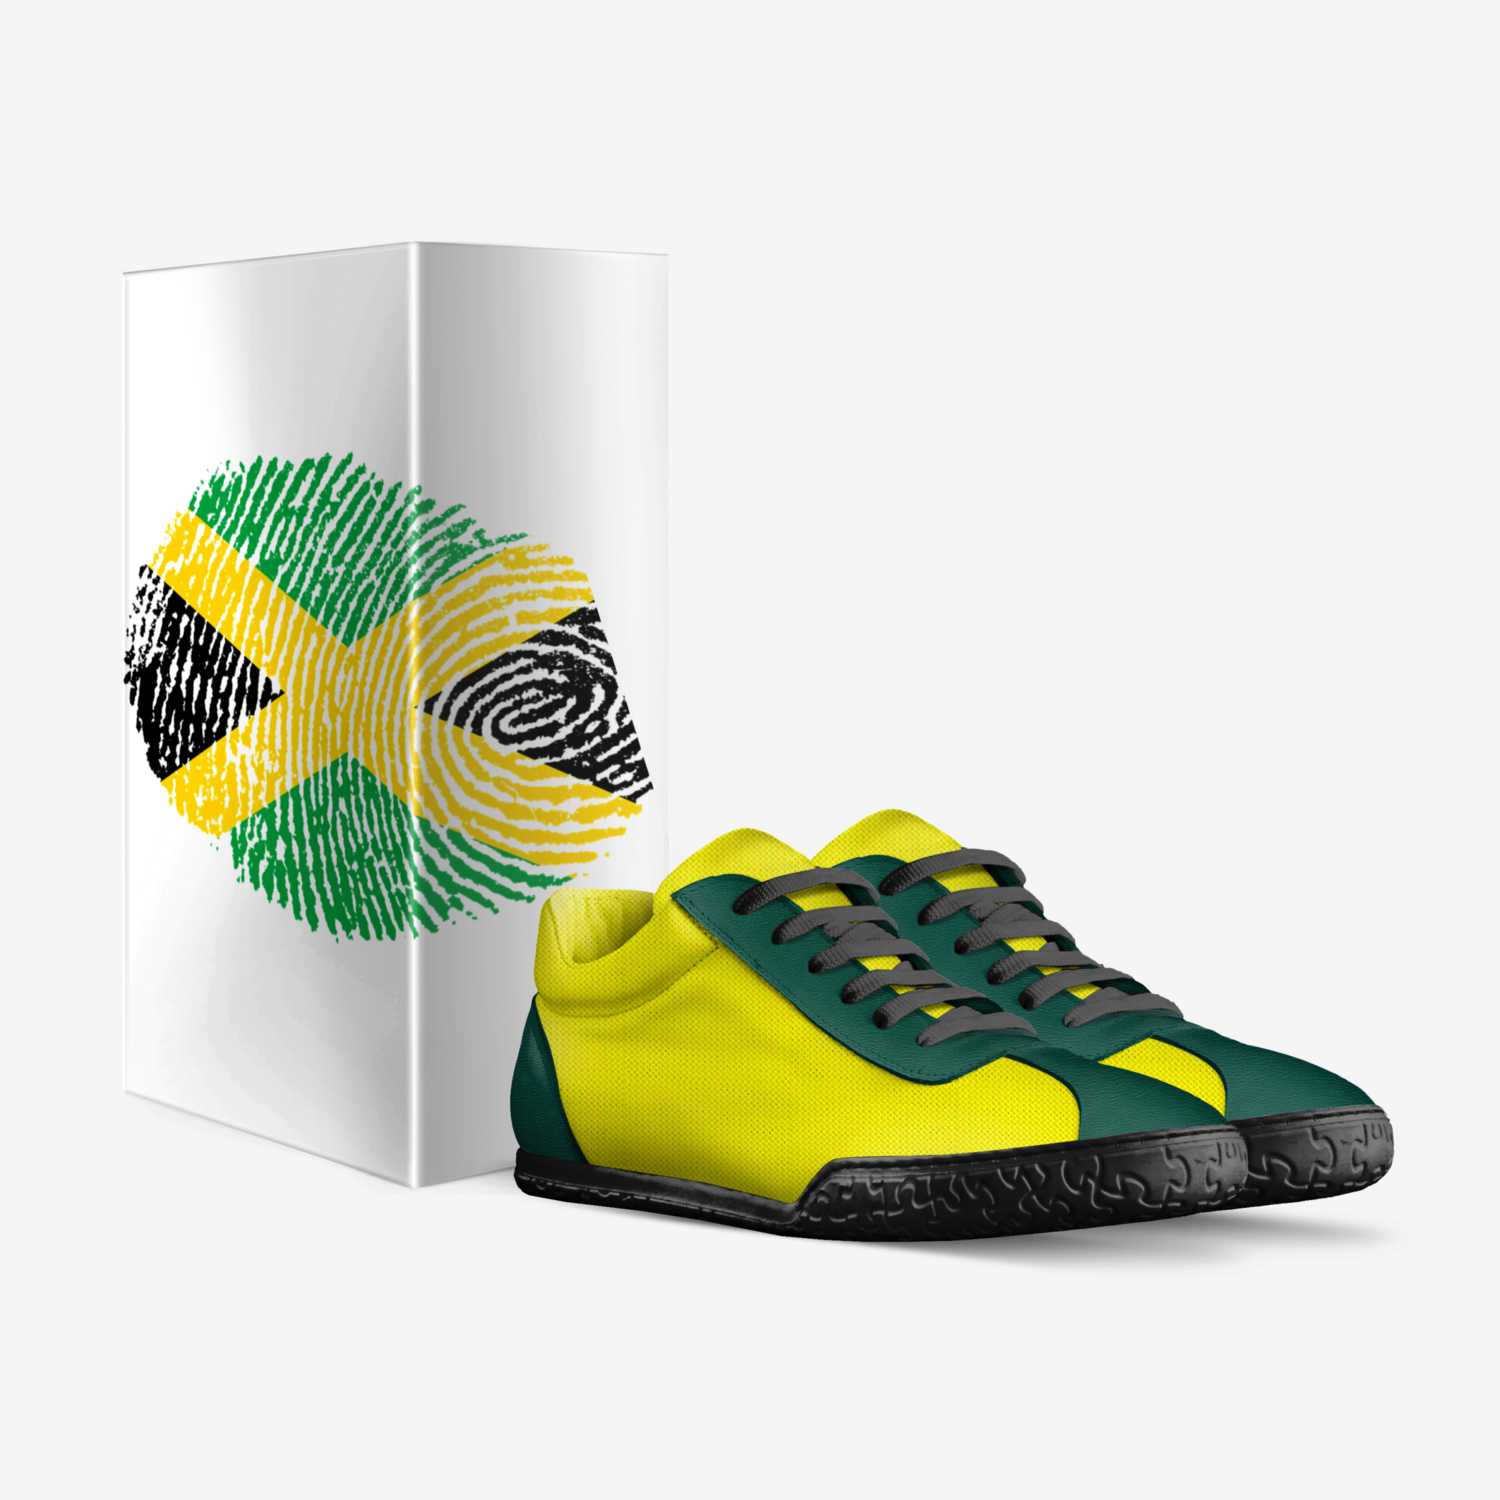 RAGGA 2 custom made in Italy shoes by Tyrone Grandison | Box view